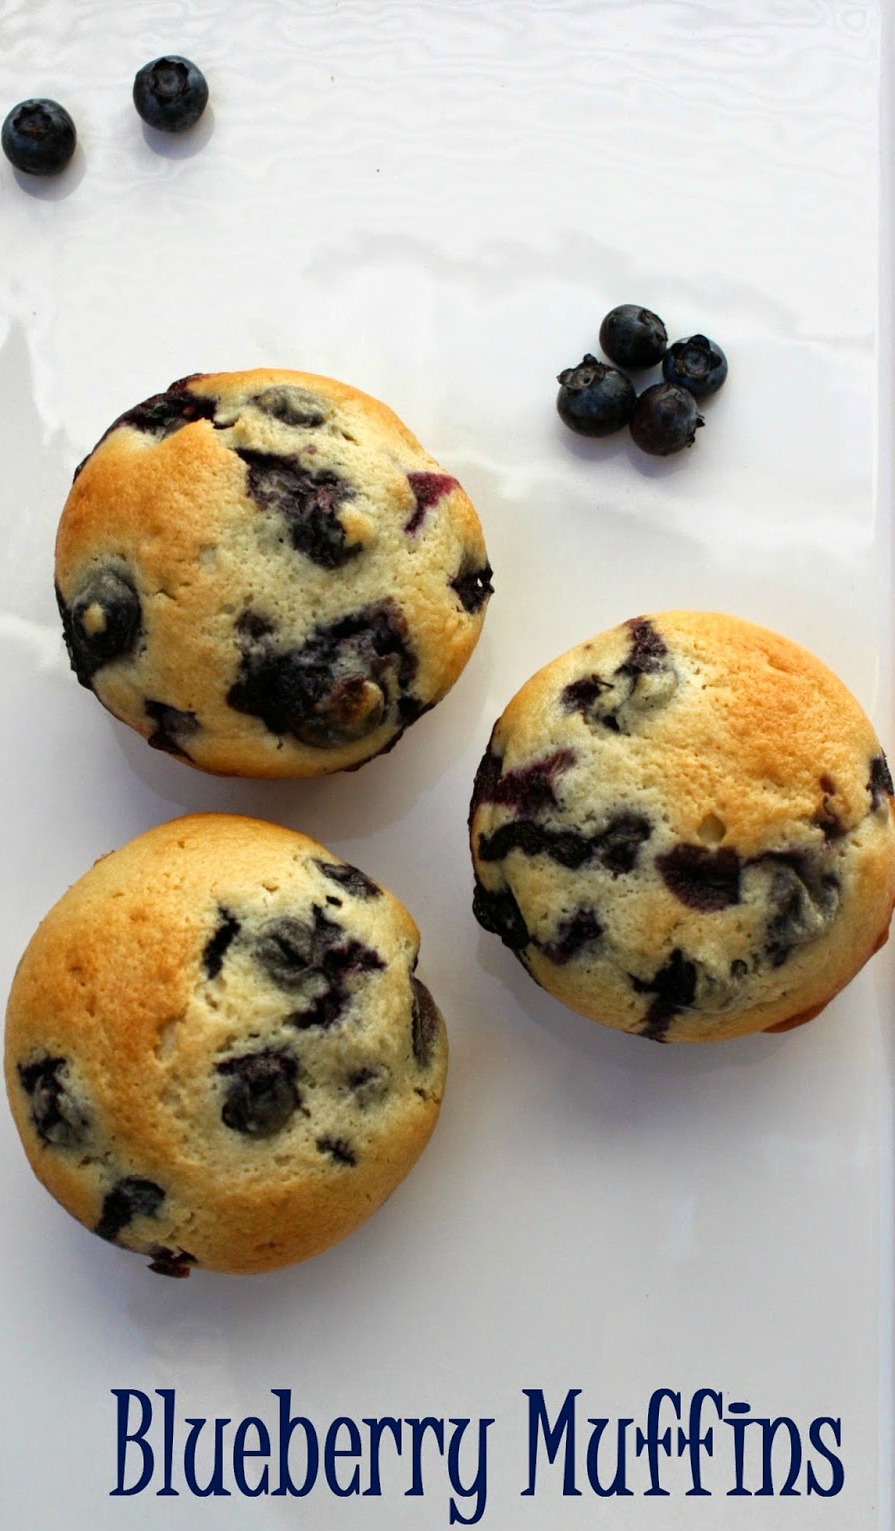 Blueberry Muffins from scratch using freshly picked blueberries. 